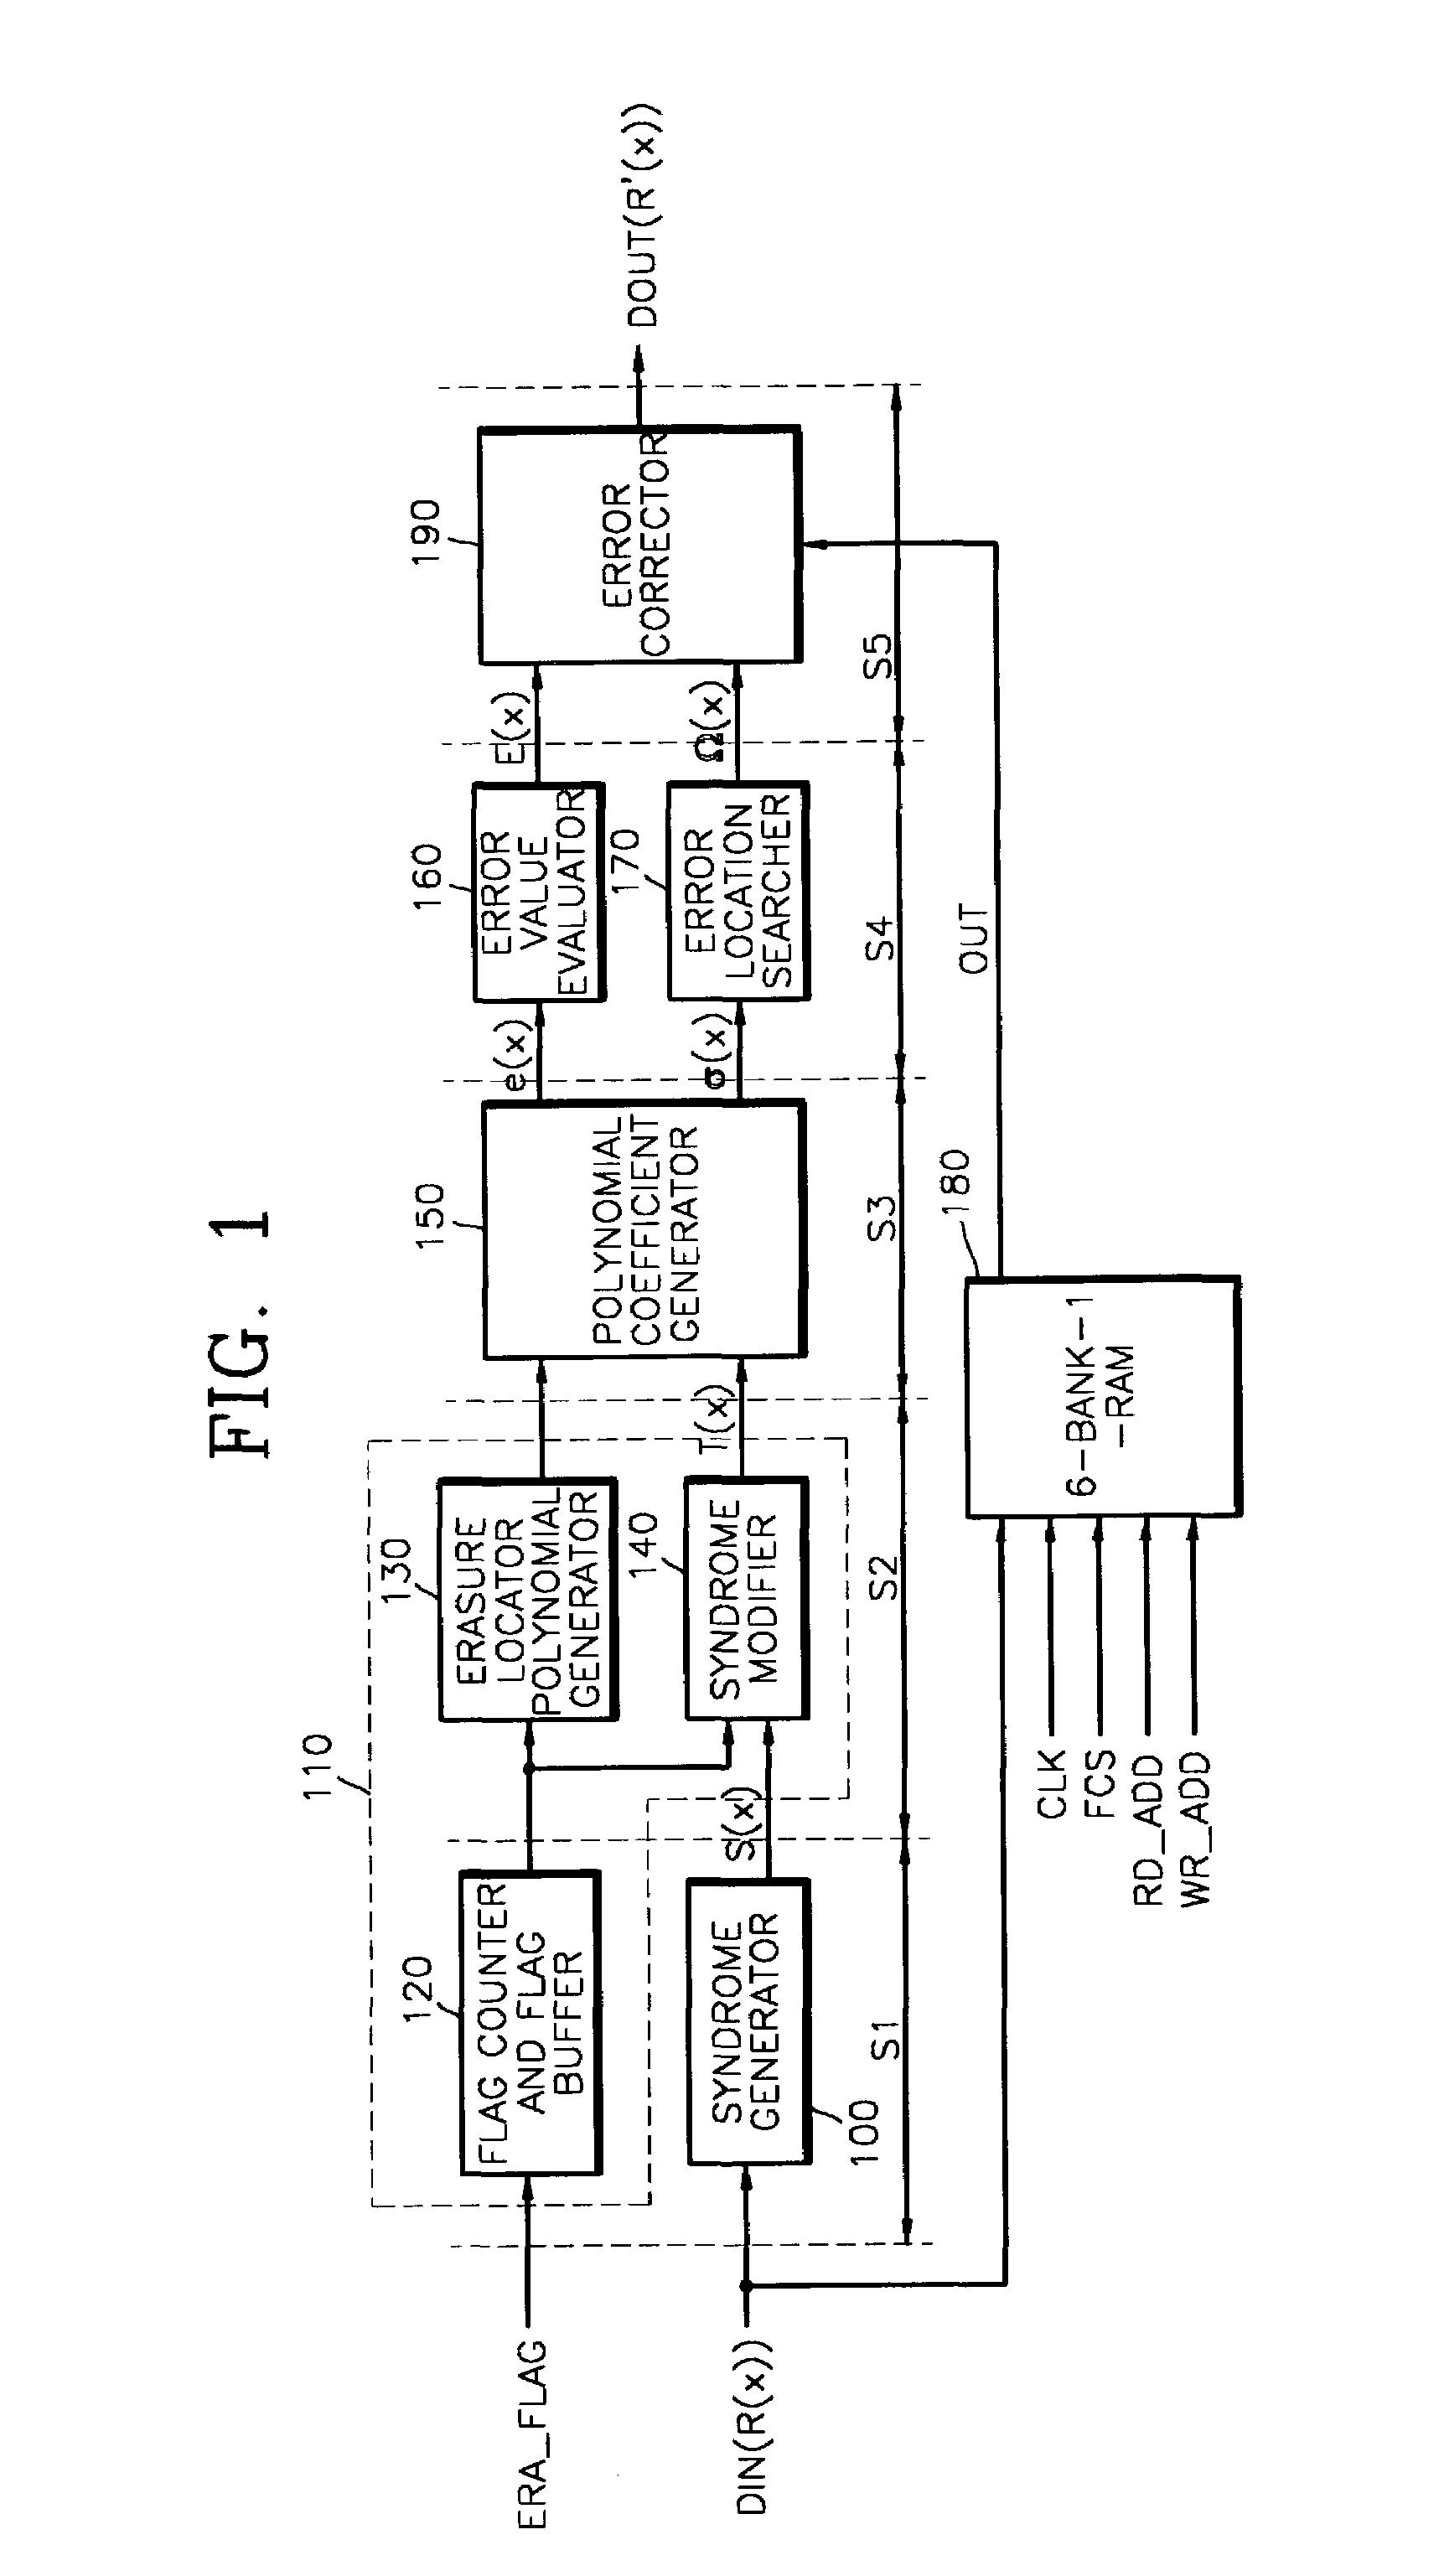 Memory device for use in high-speed block pipelined Reed-Solomon decoder, method of accessing the memory device, and Reed-Solomon decoder having the memory device